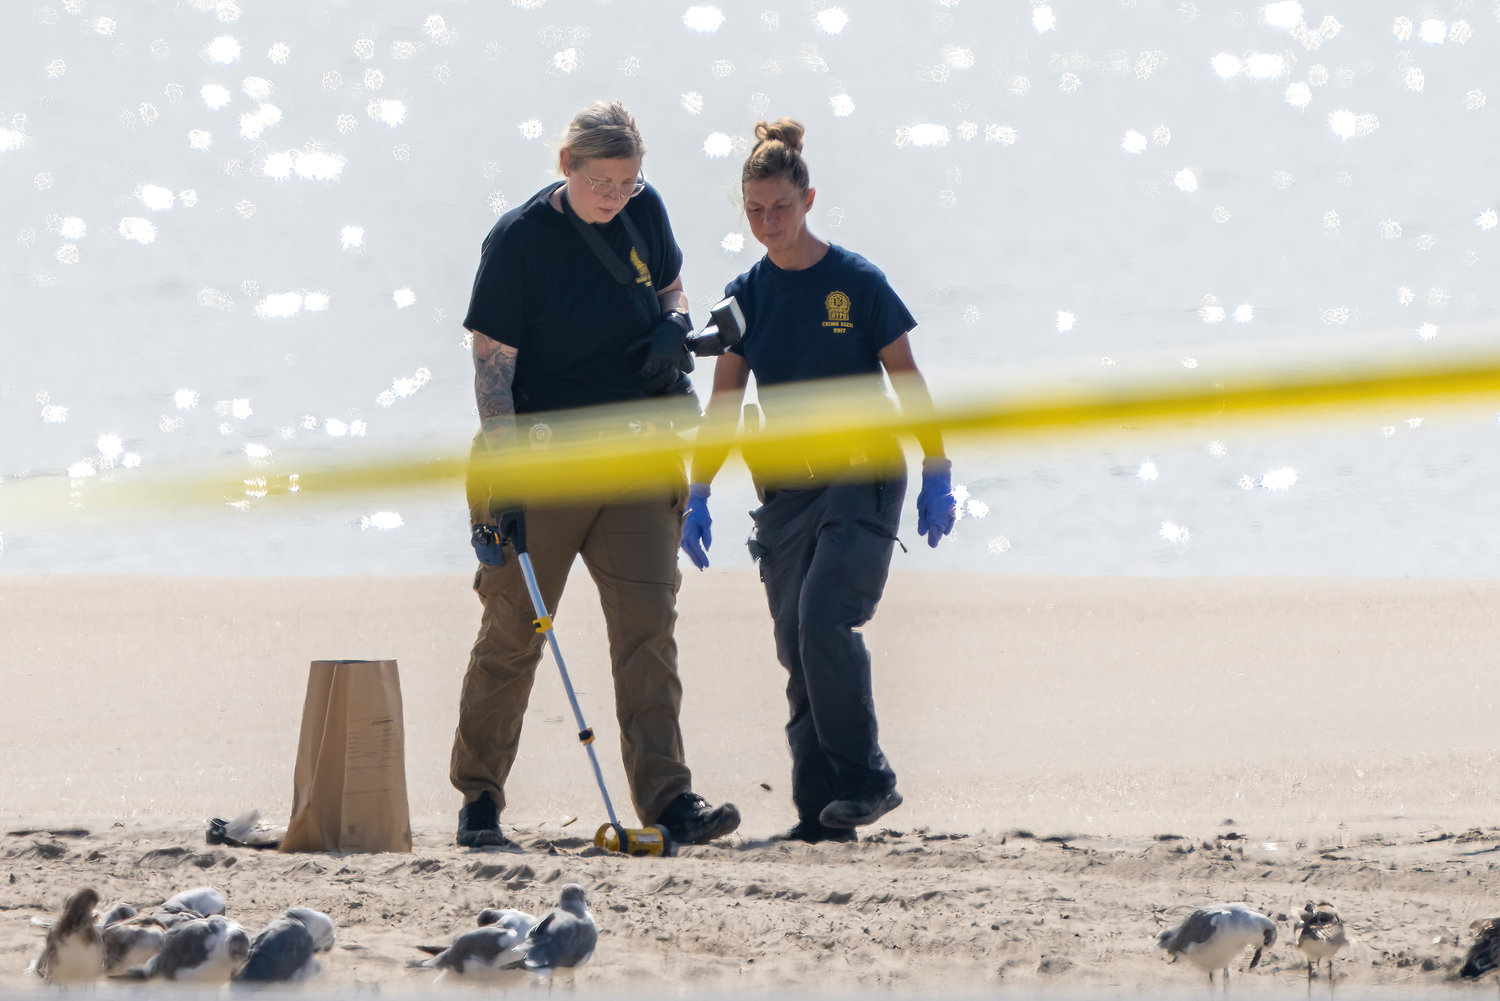 The children of Erin Merdy, 30, were found unconscious near the shoreline of Coney Island Beach during a frantic overnight search early Monday, Sept. 12, 2022. (Theodore Parisienne/New York Daily News/TNS)